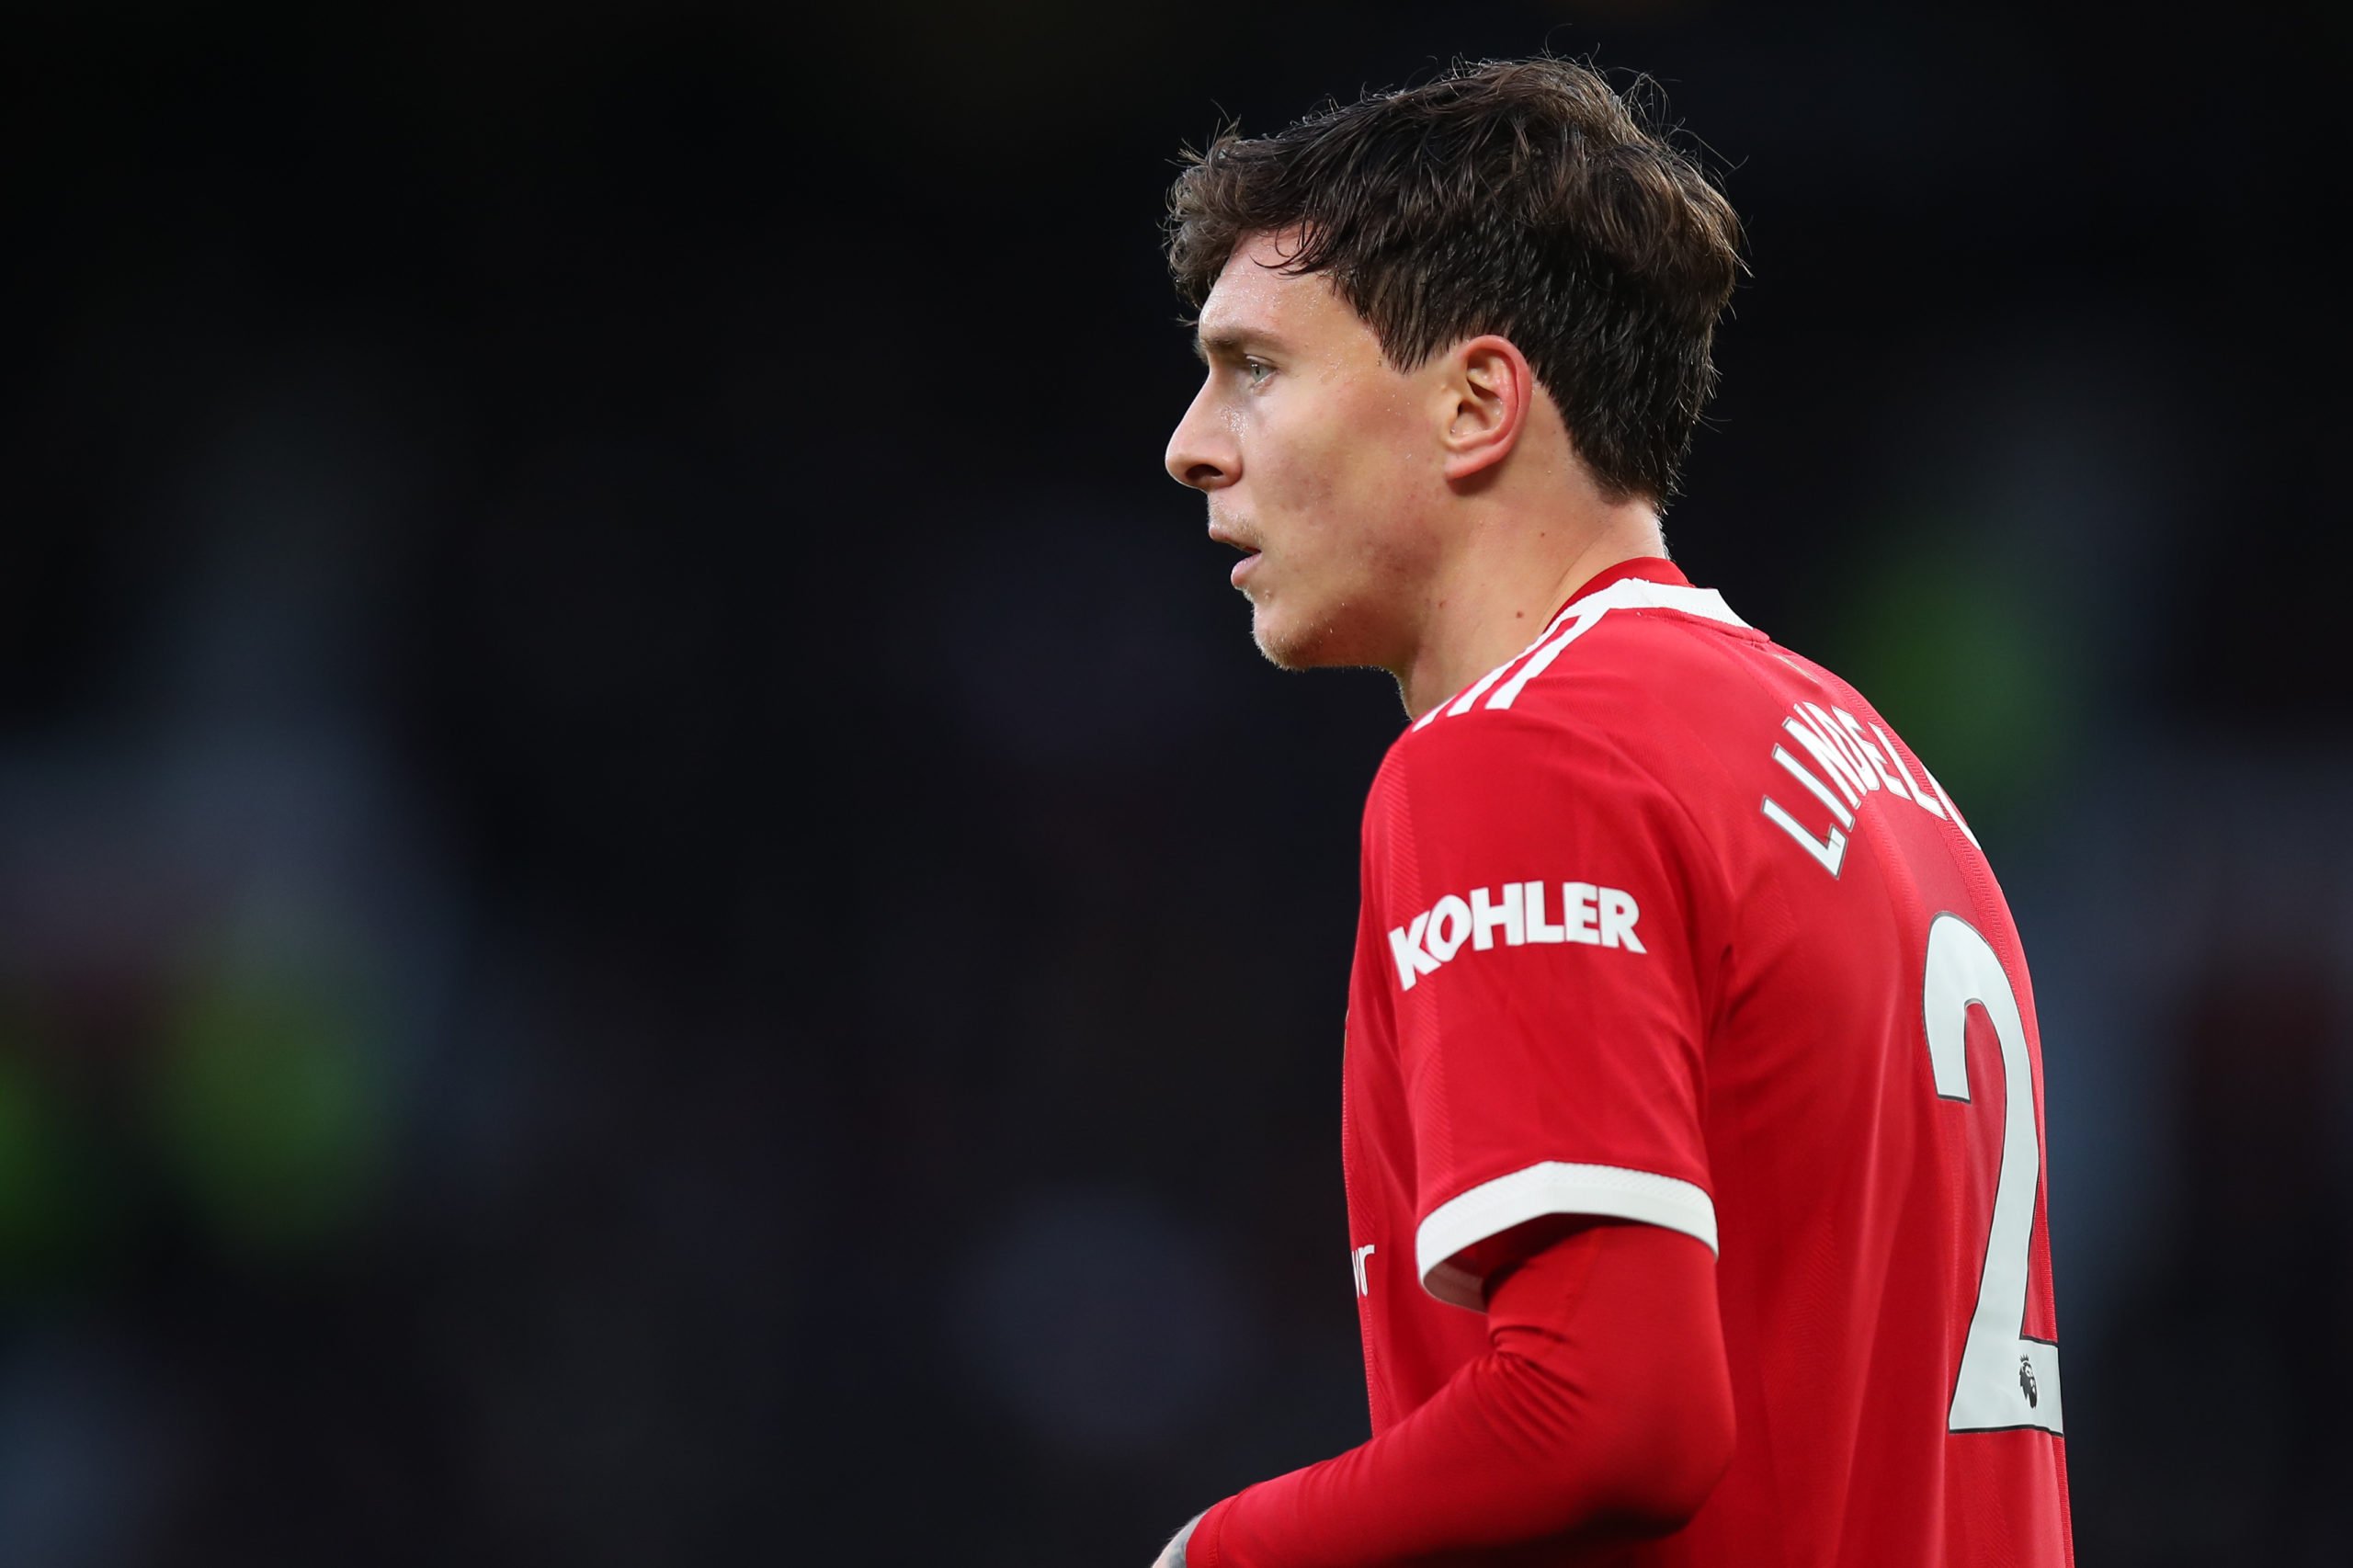 Victor Lindelof returns to training ahead of Manchester United clash with Burnley